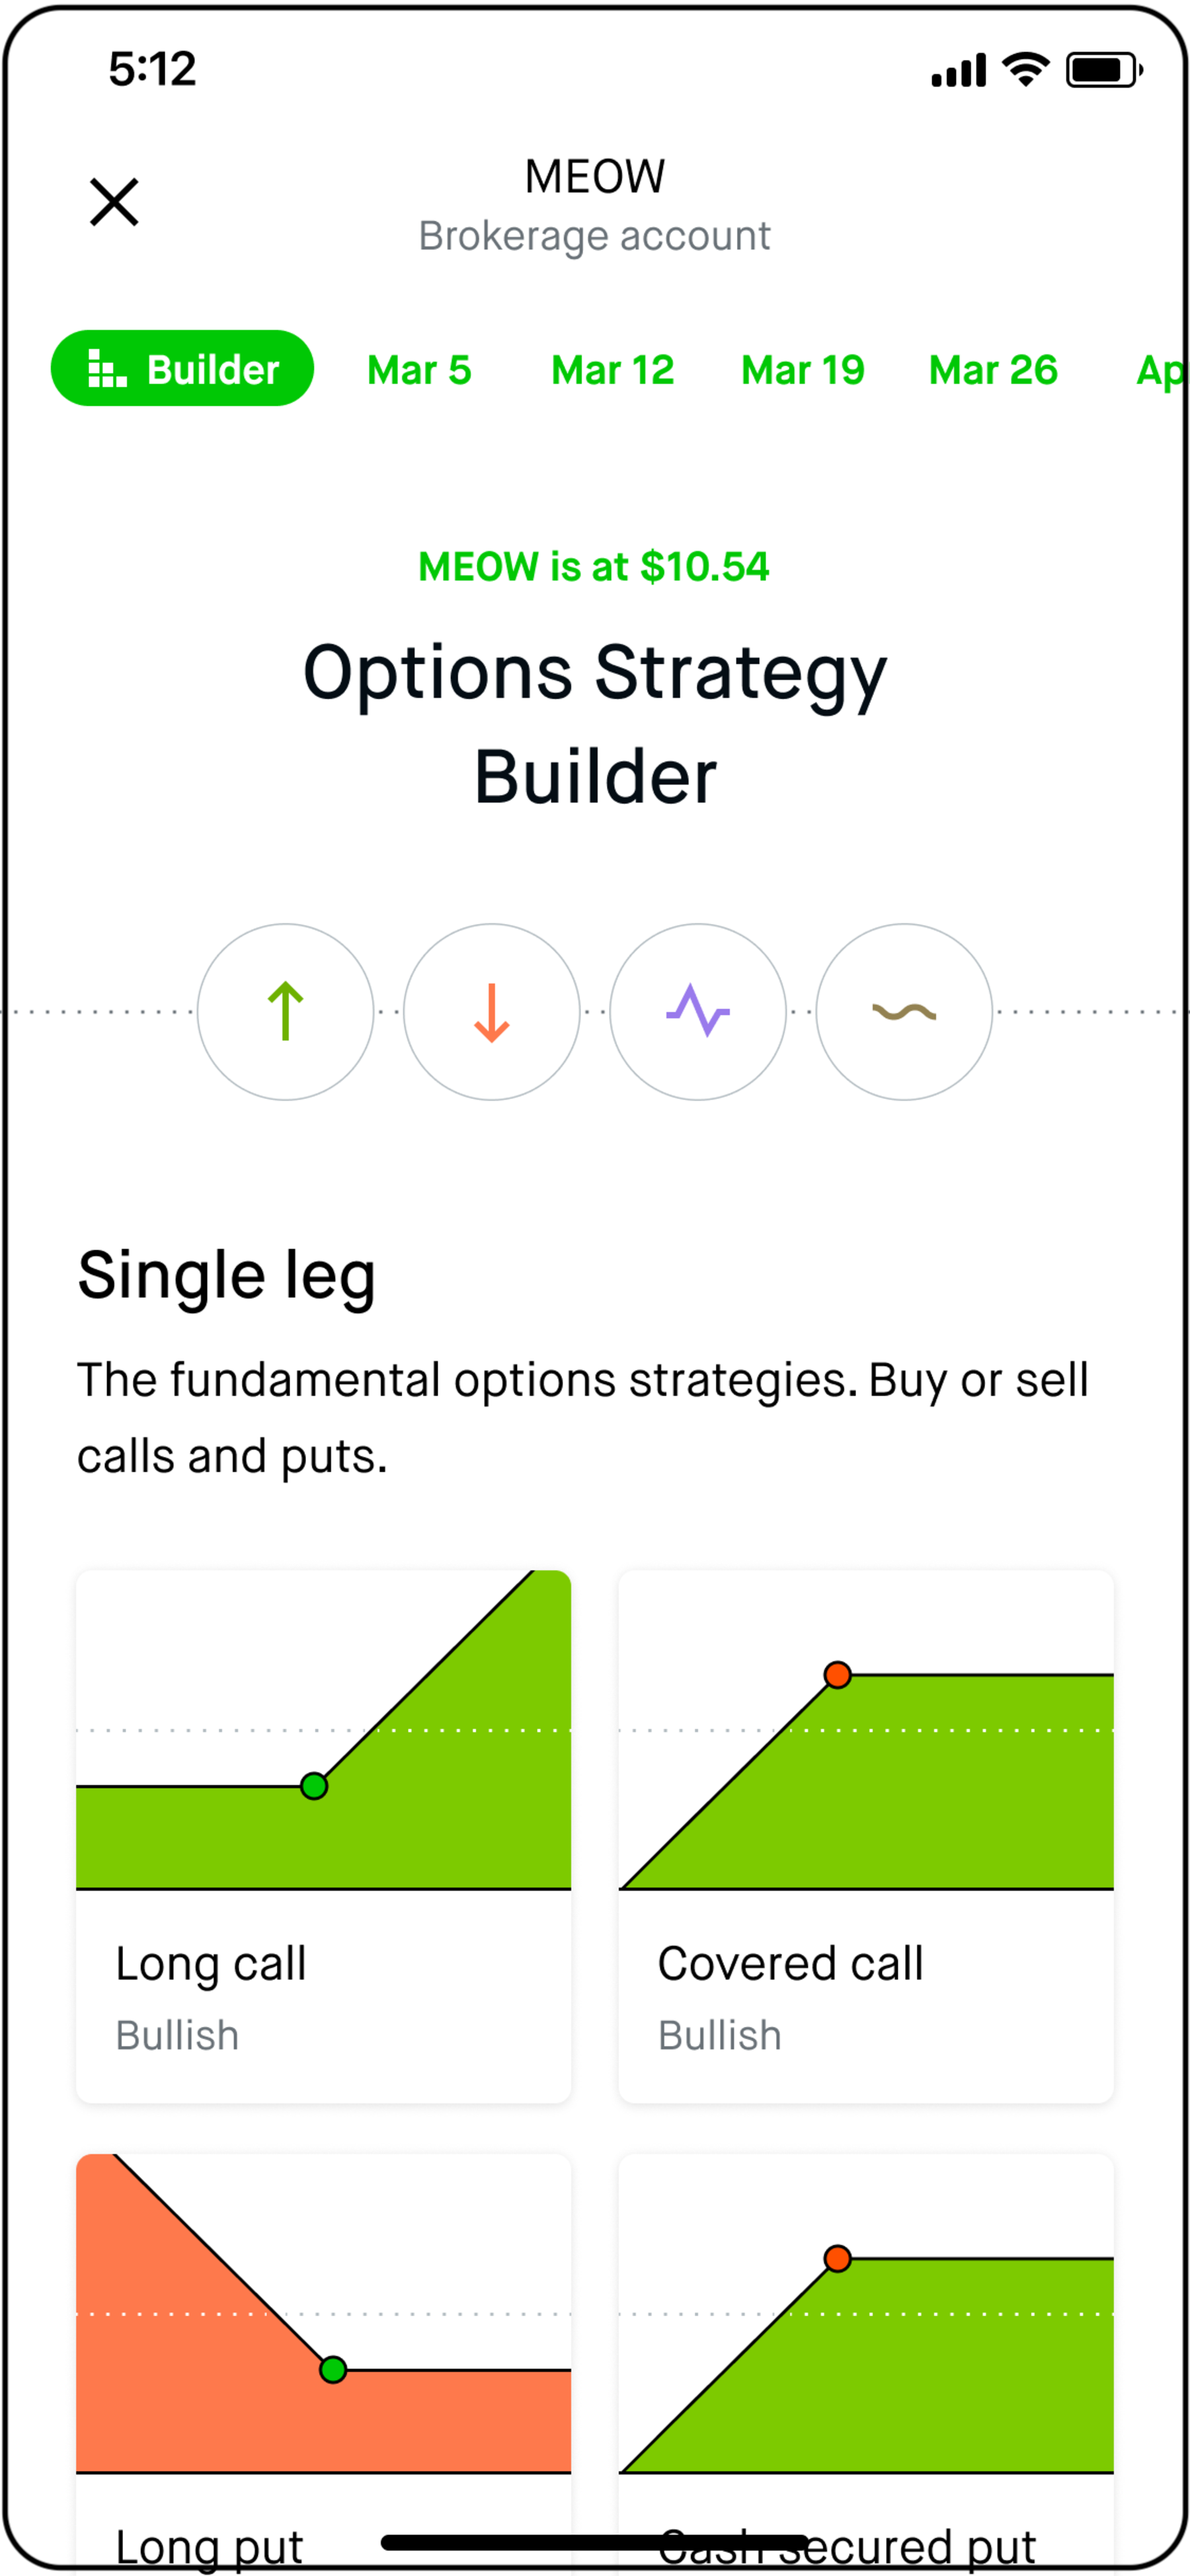 Options Strategy Builder image